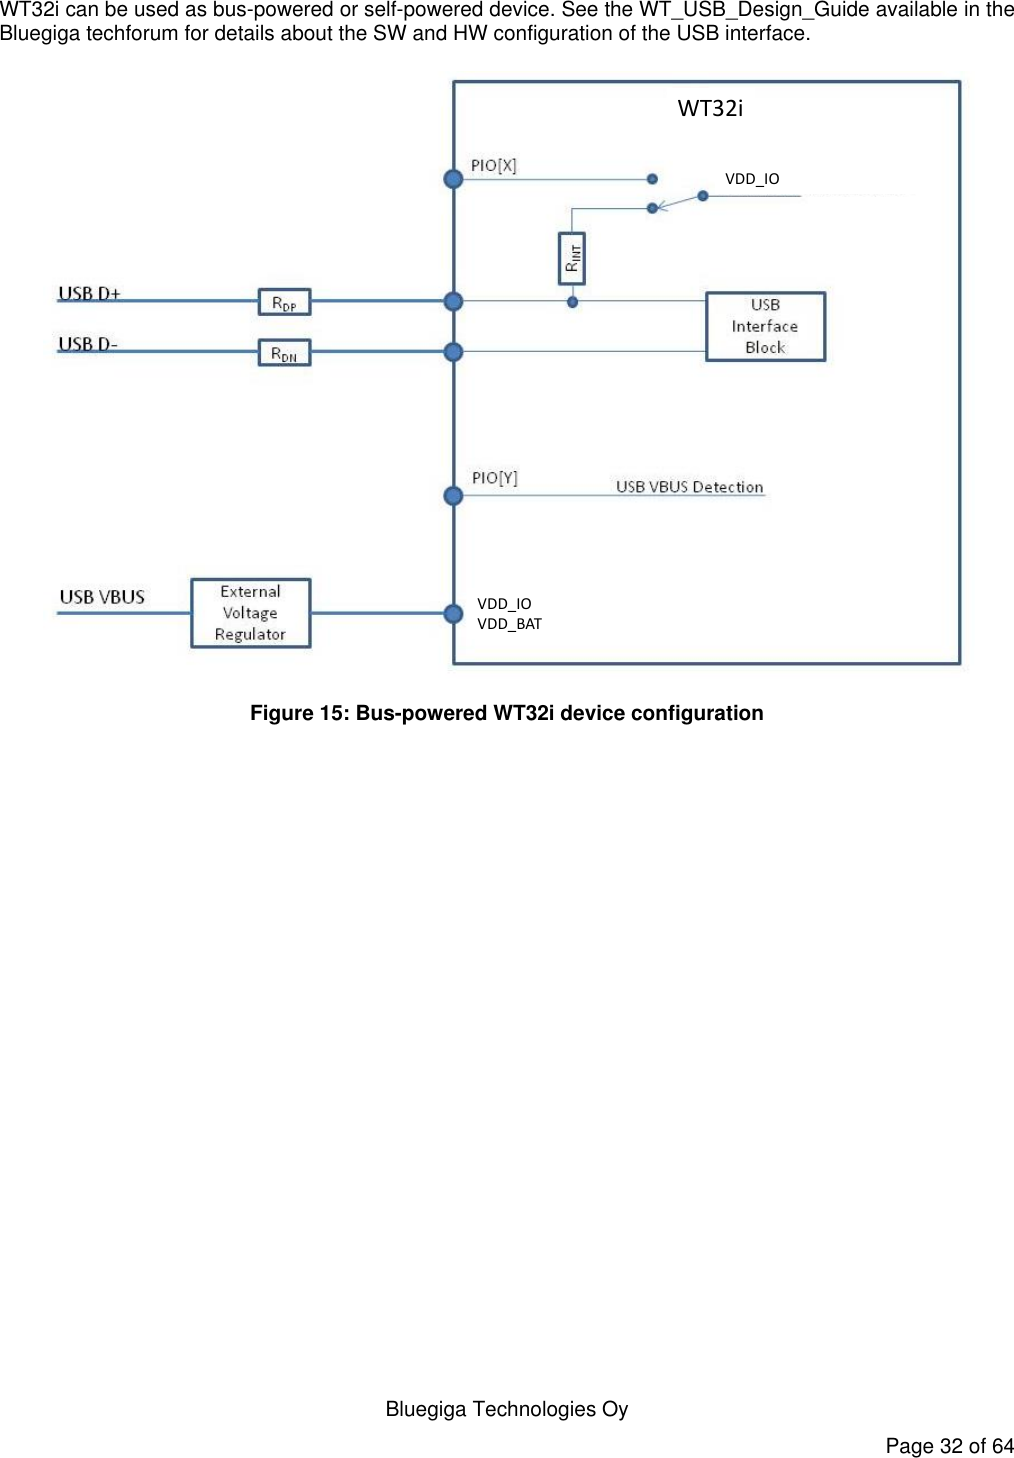   Bluegiga Technologies Oy Page 32 of 64 WT32i can be used as bus-powered or self-powered device. See the WT_USB_Design_Guide available in the Bluegiga techforum for details about the SW and HW configuration of the USB interface. WT32iVDD_IOVDD_BATVDD_IO Figure 15: Bus-powered WT32i device configuration  